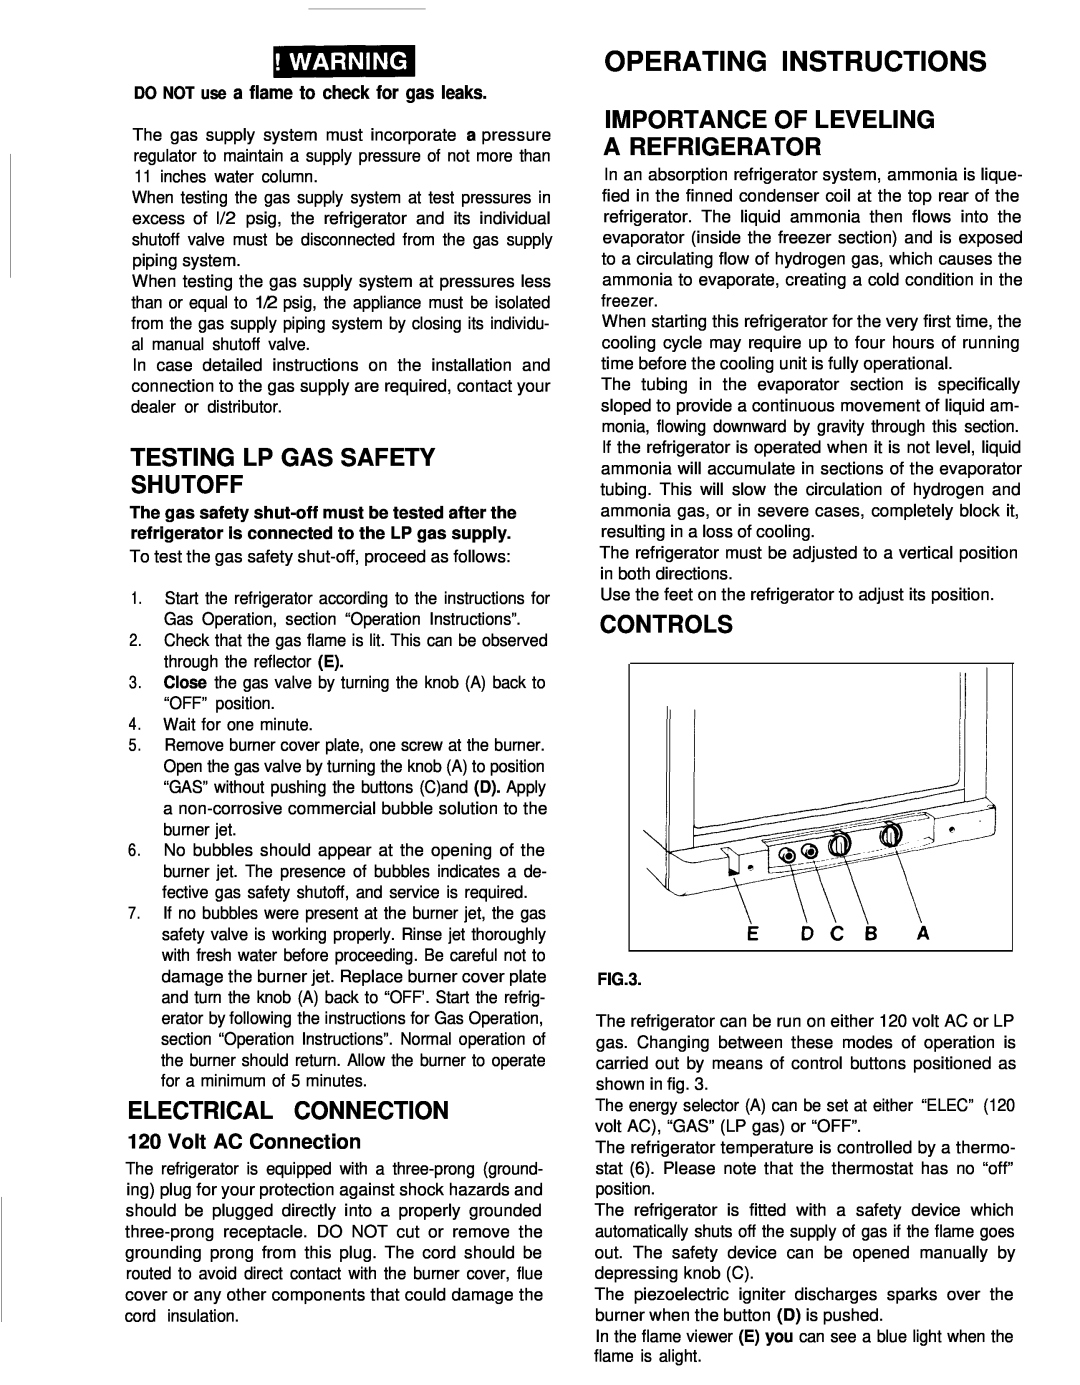 Dometic RGE400 Operating Instructions, Testing Lp Gas Safety Shutoff, Electrical Connection, Controls, Volt AC Connection 